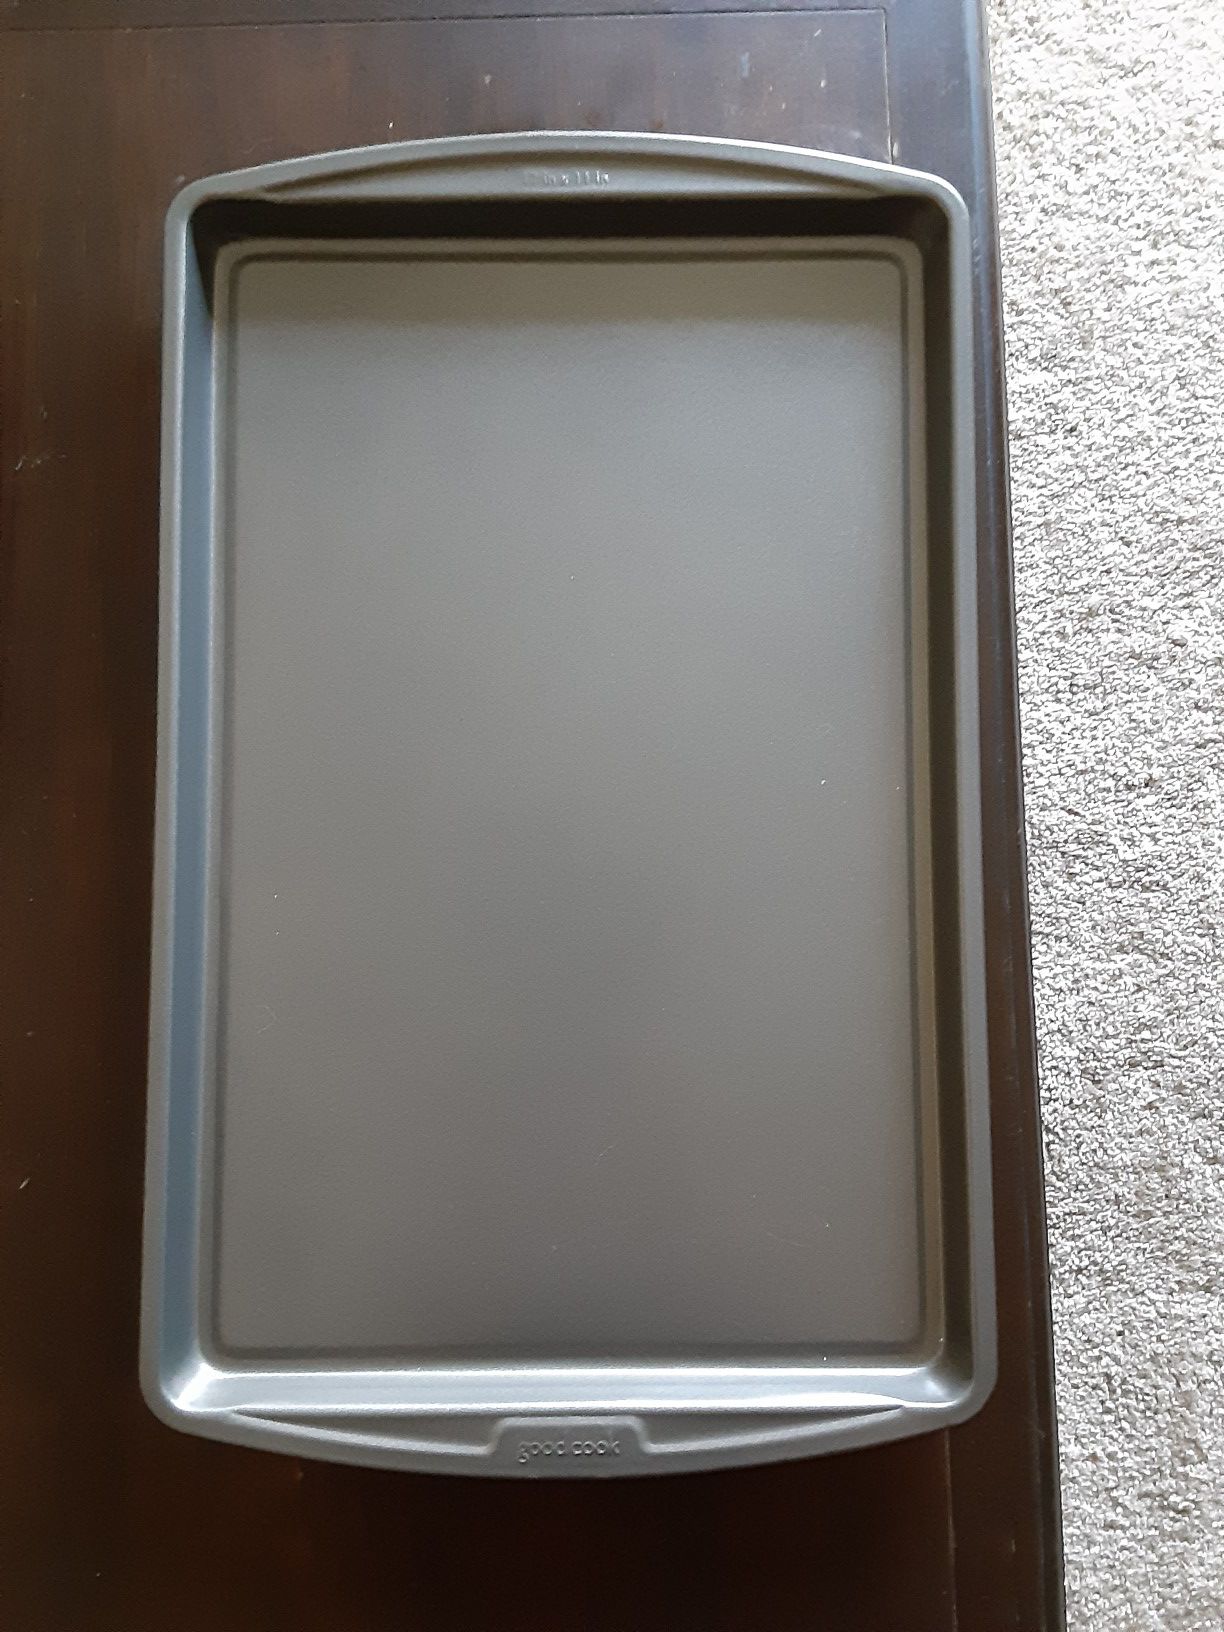 Brand new 17 x 11 cooking pan